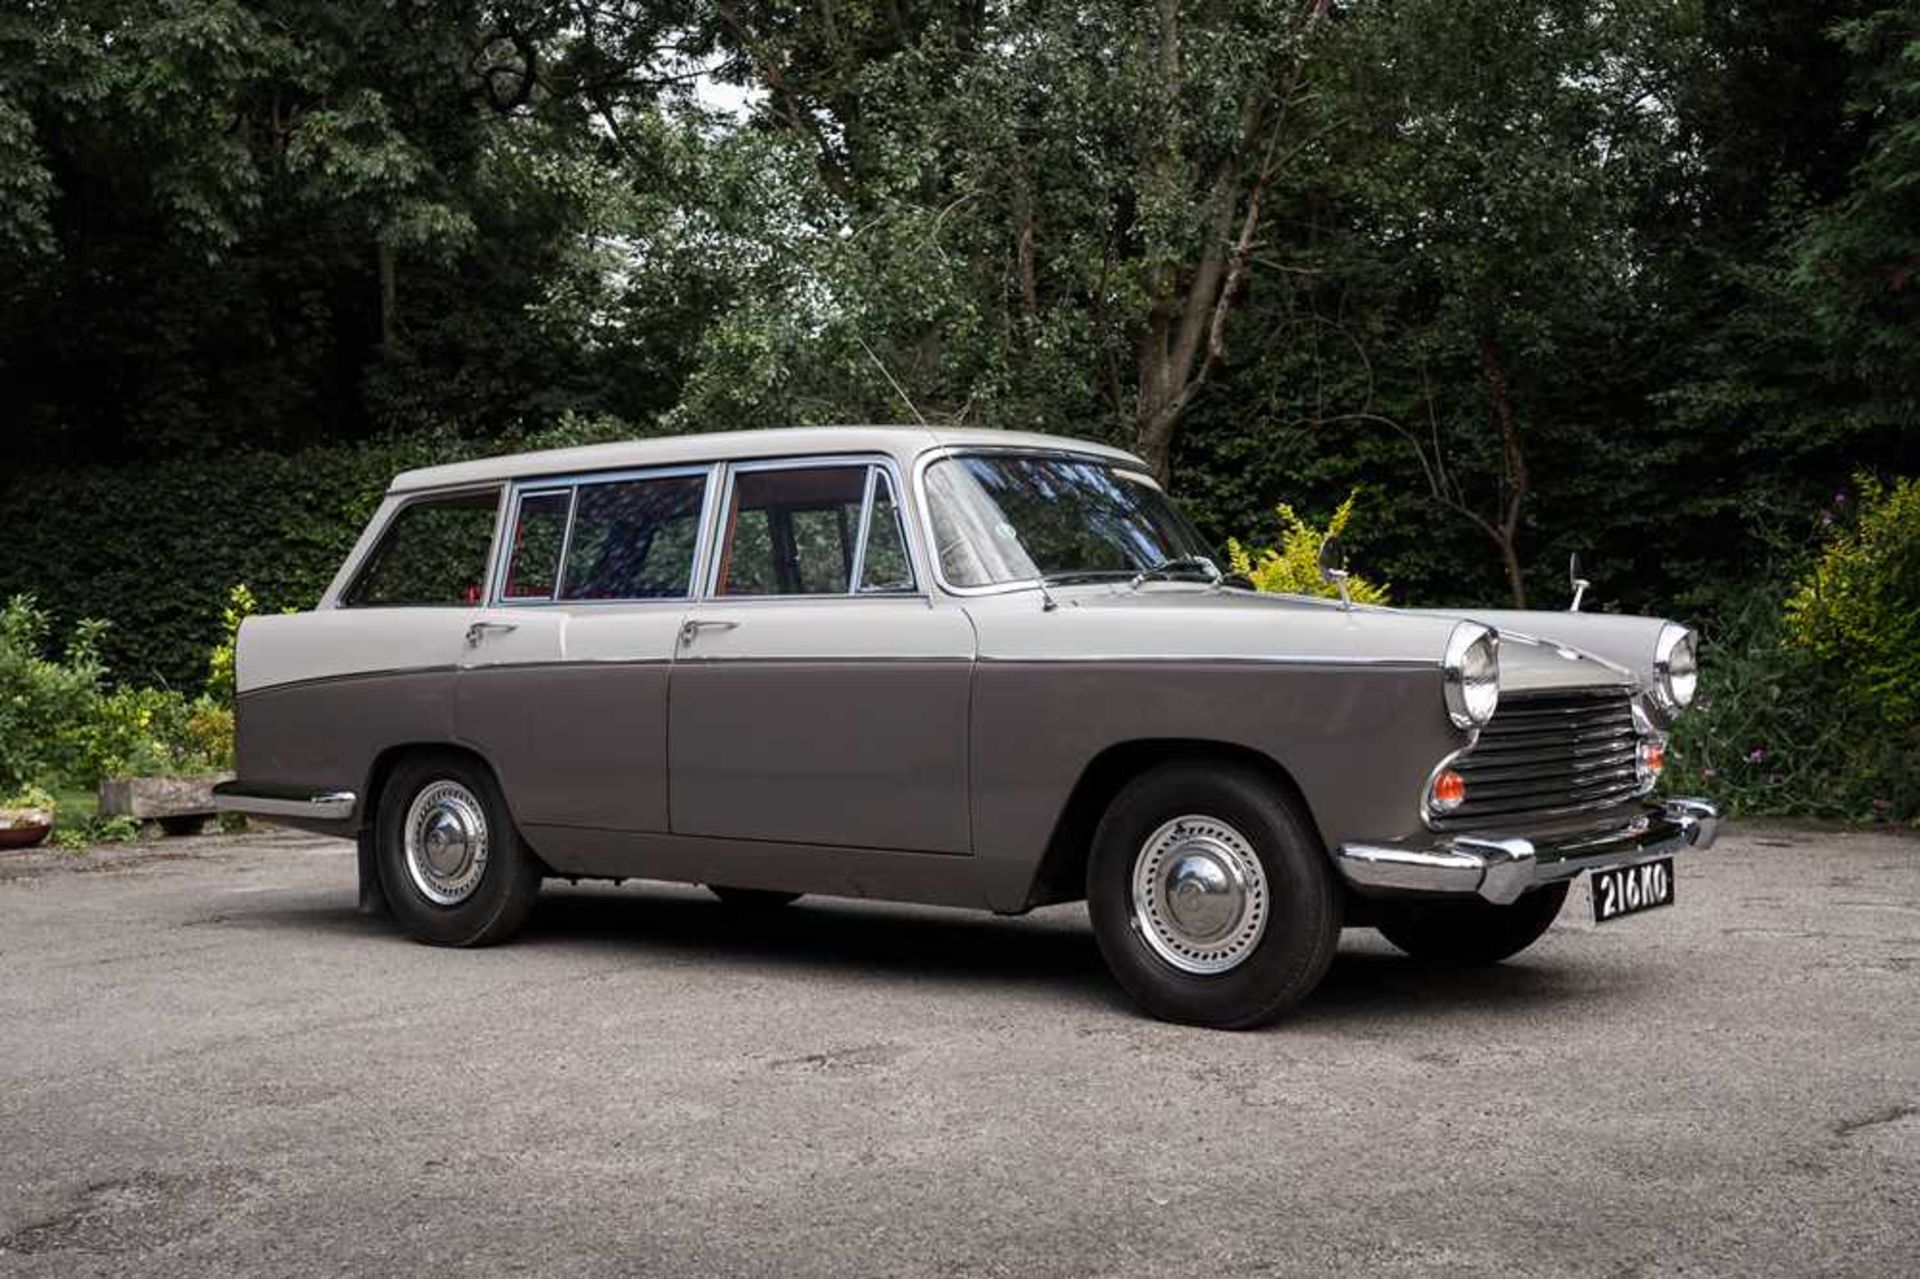 1964 Morris Oxford Series VI Farina Traveller Just 7,000 miles from new - Image 2 of 98